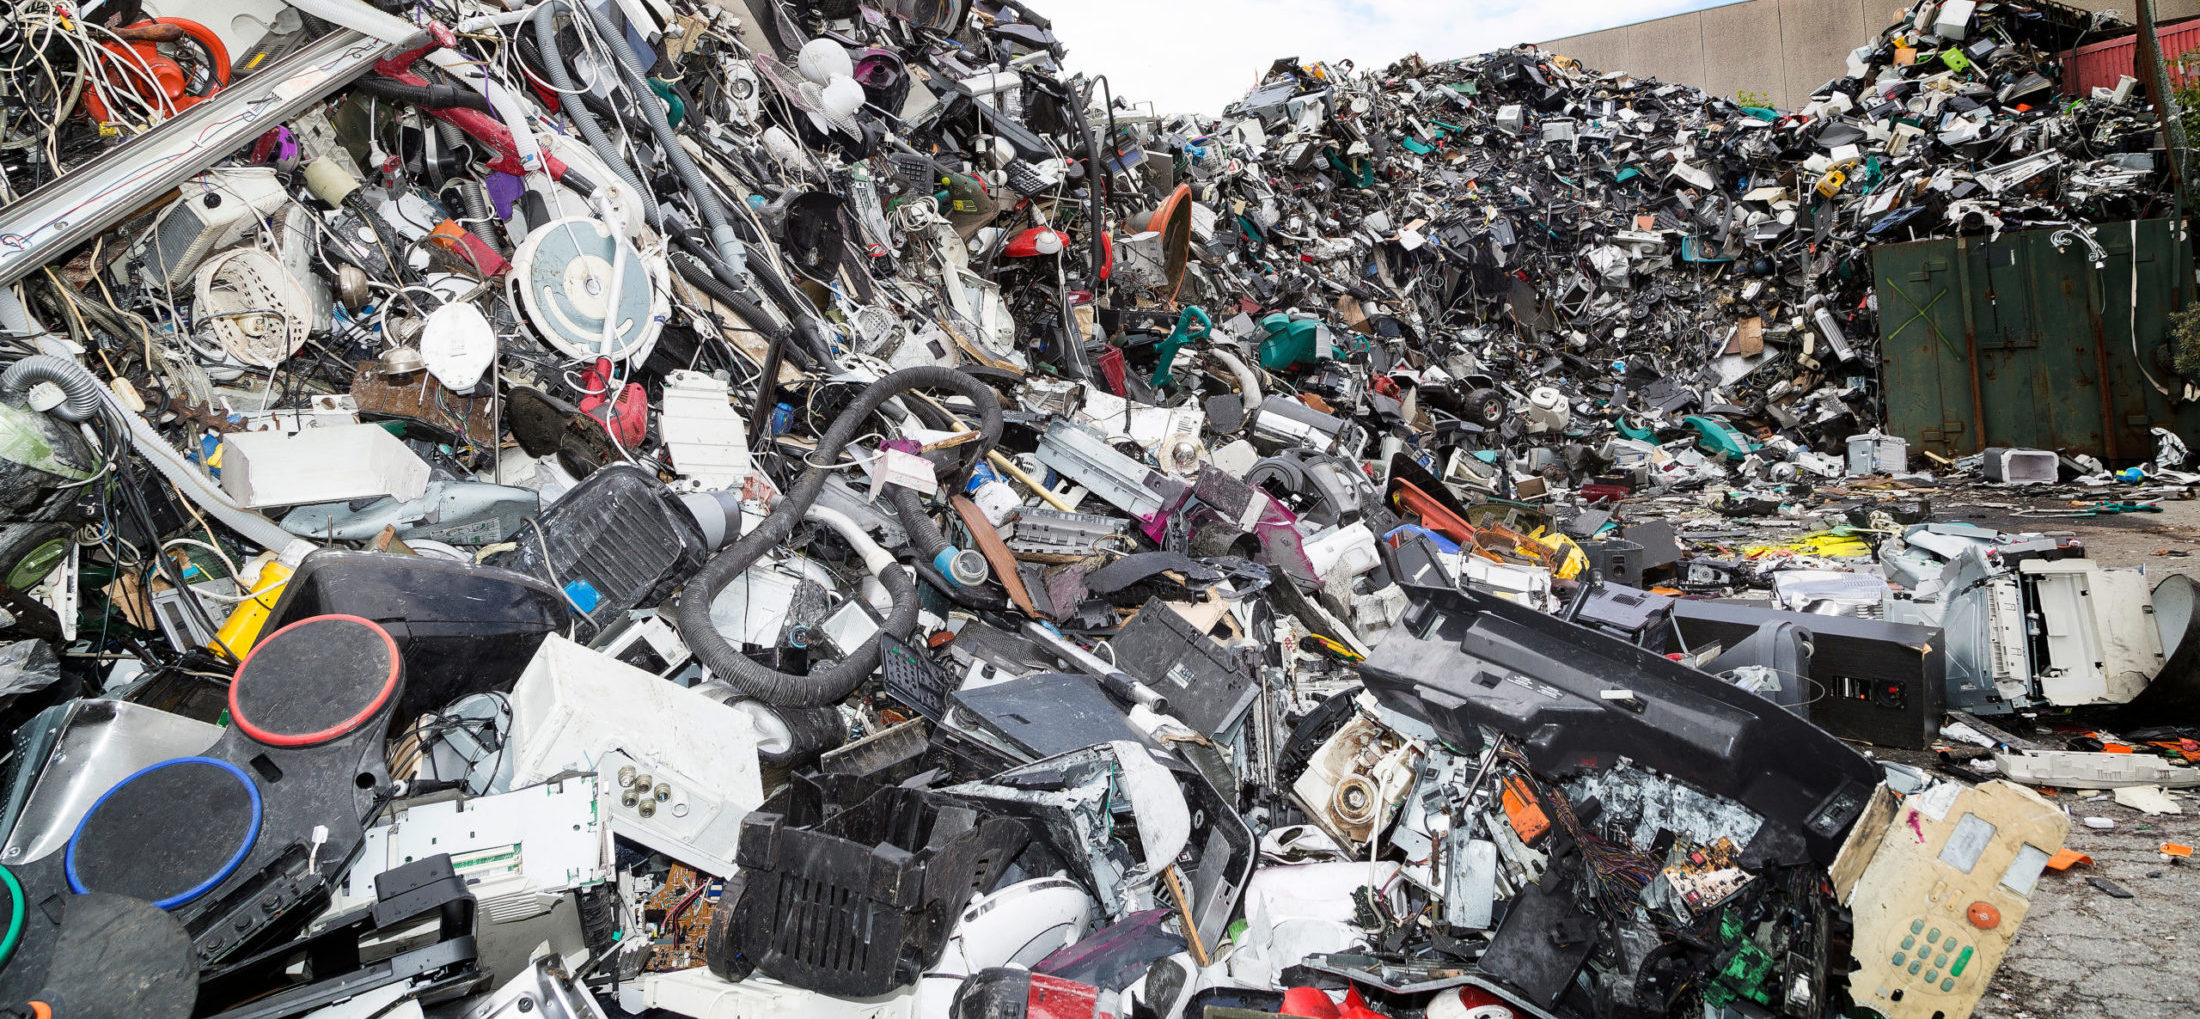 Landfill full of household electricals